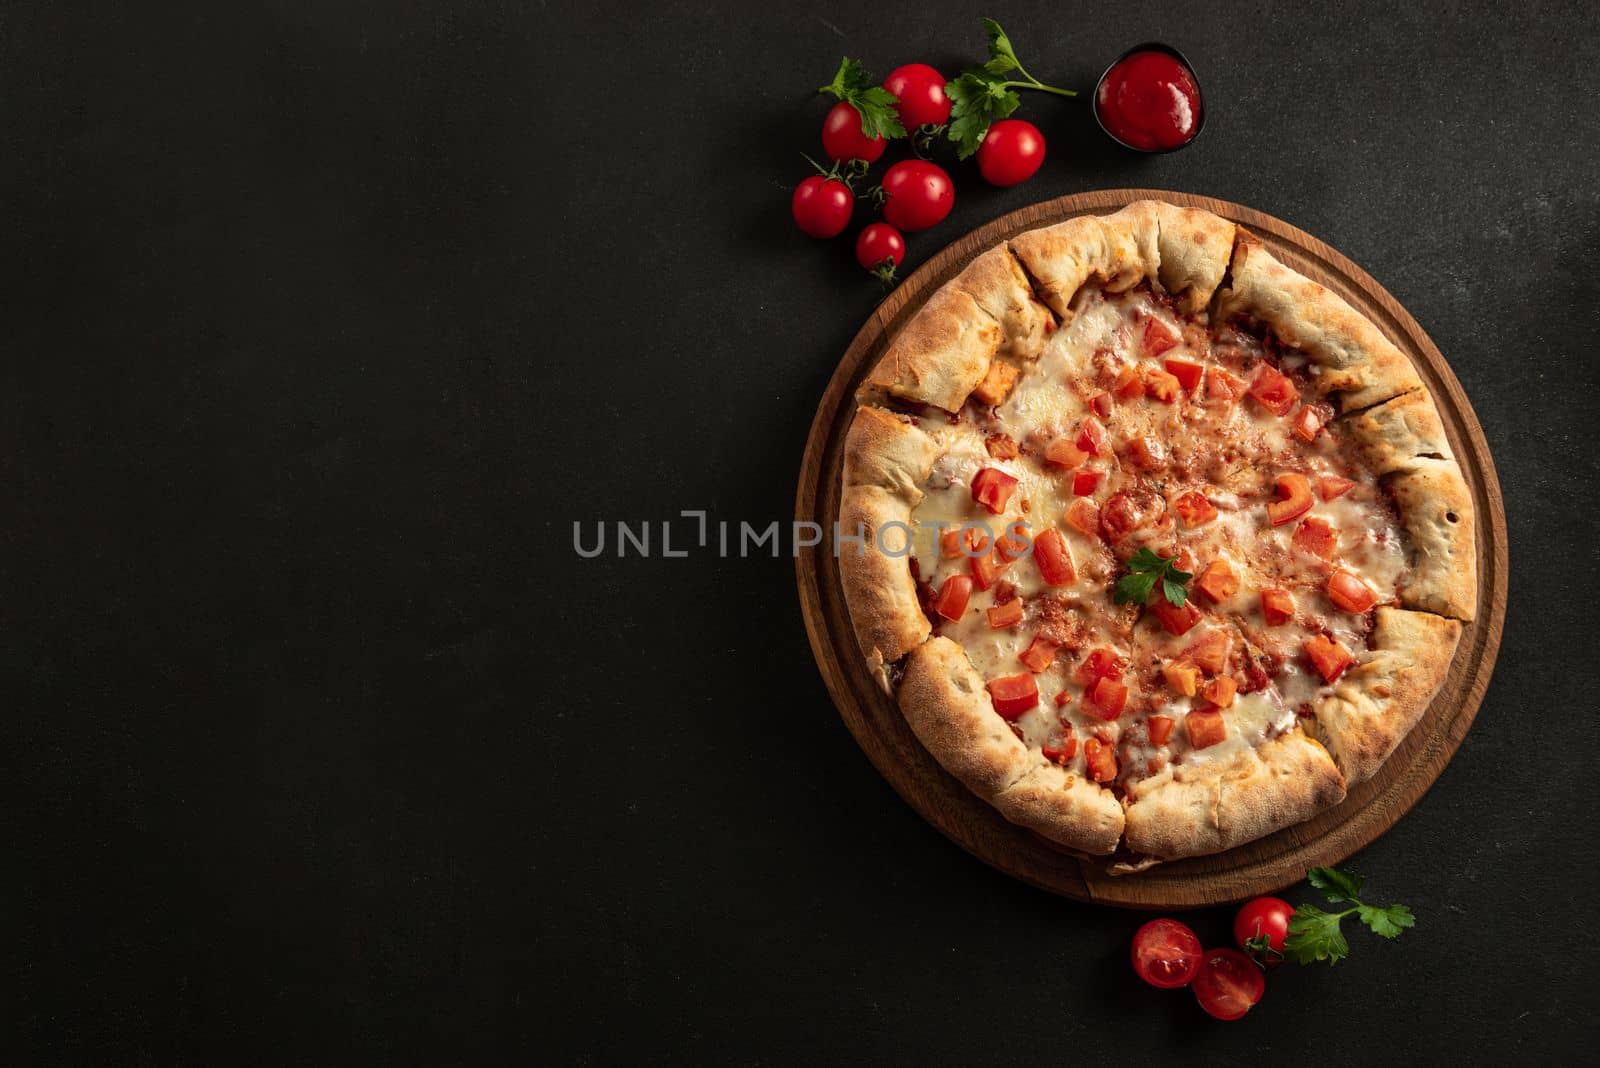 Neapolitan pizza with spices, tomatoes and mozzarella cheese on a dark background. Margarita pizza with mozzarella, tomato sauce, spinach on thick dough. Top view. Copy space.